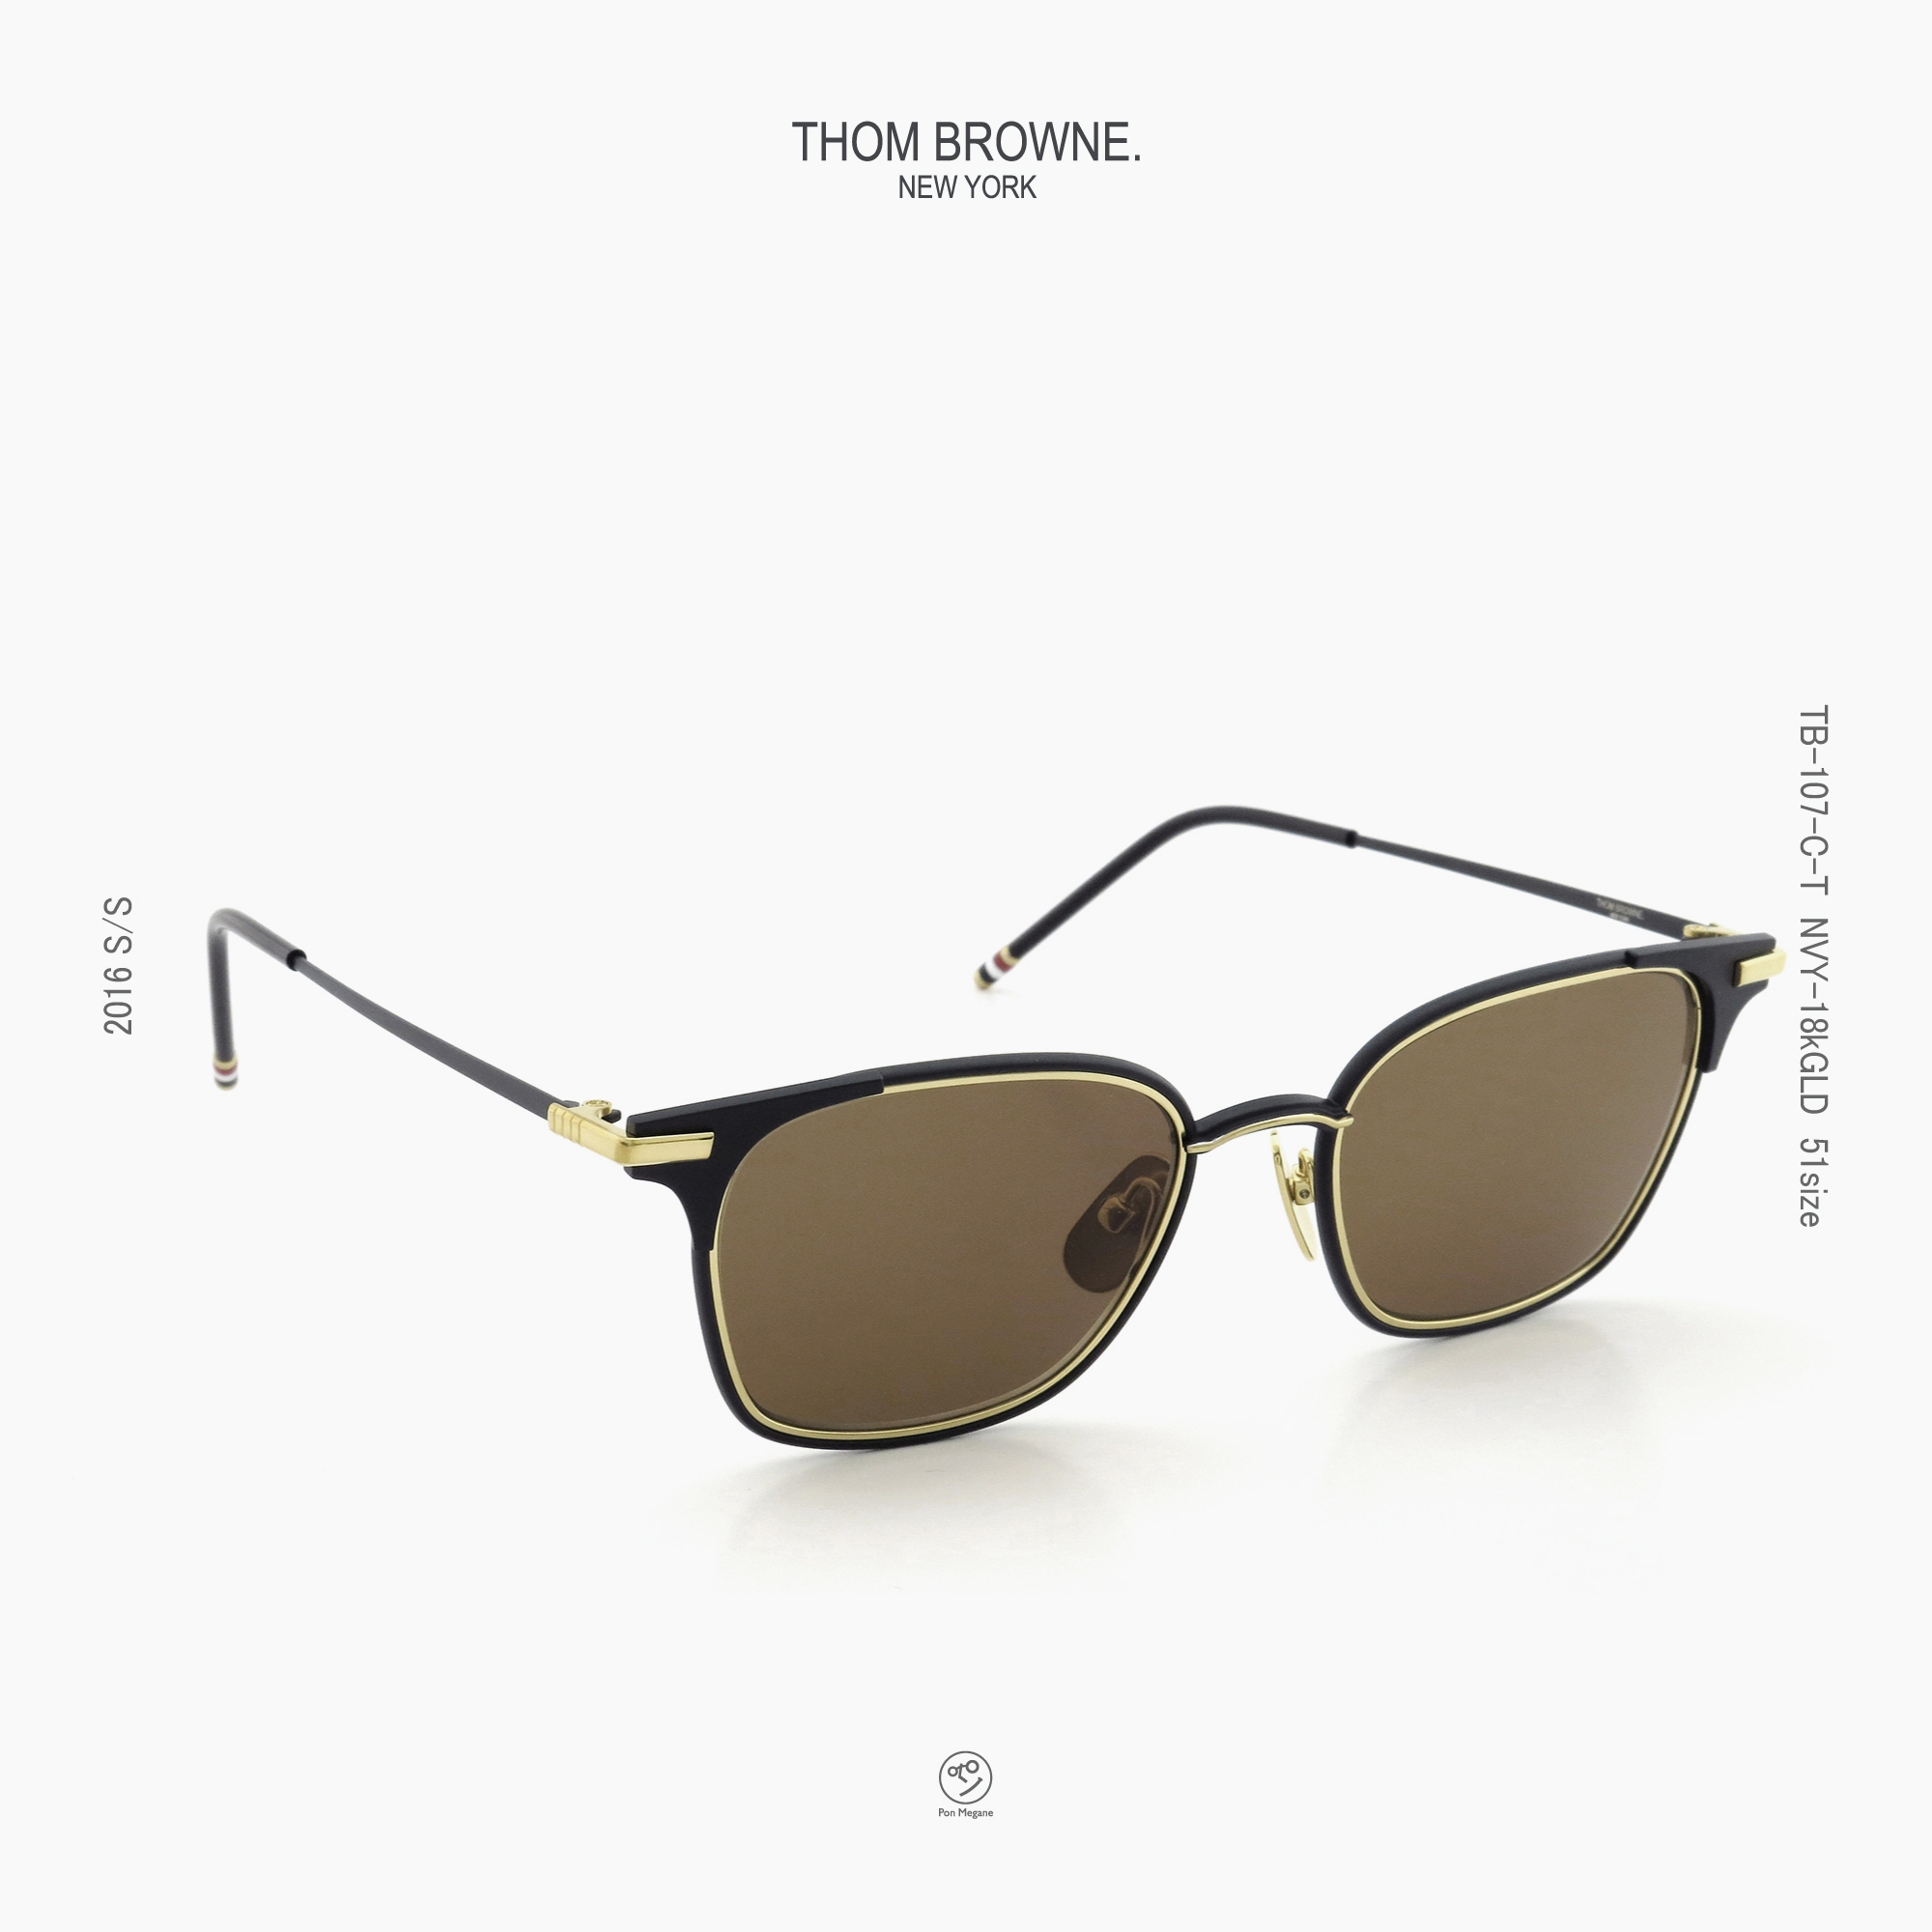 THOM-BROWNE_TB-107-C-T_NVY-18KGLD_51_insta